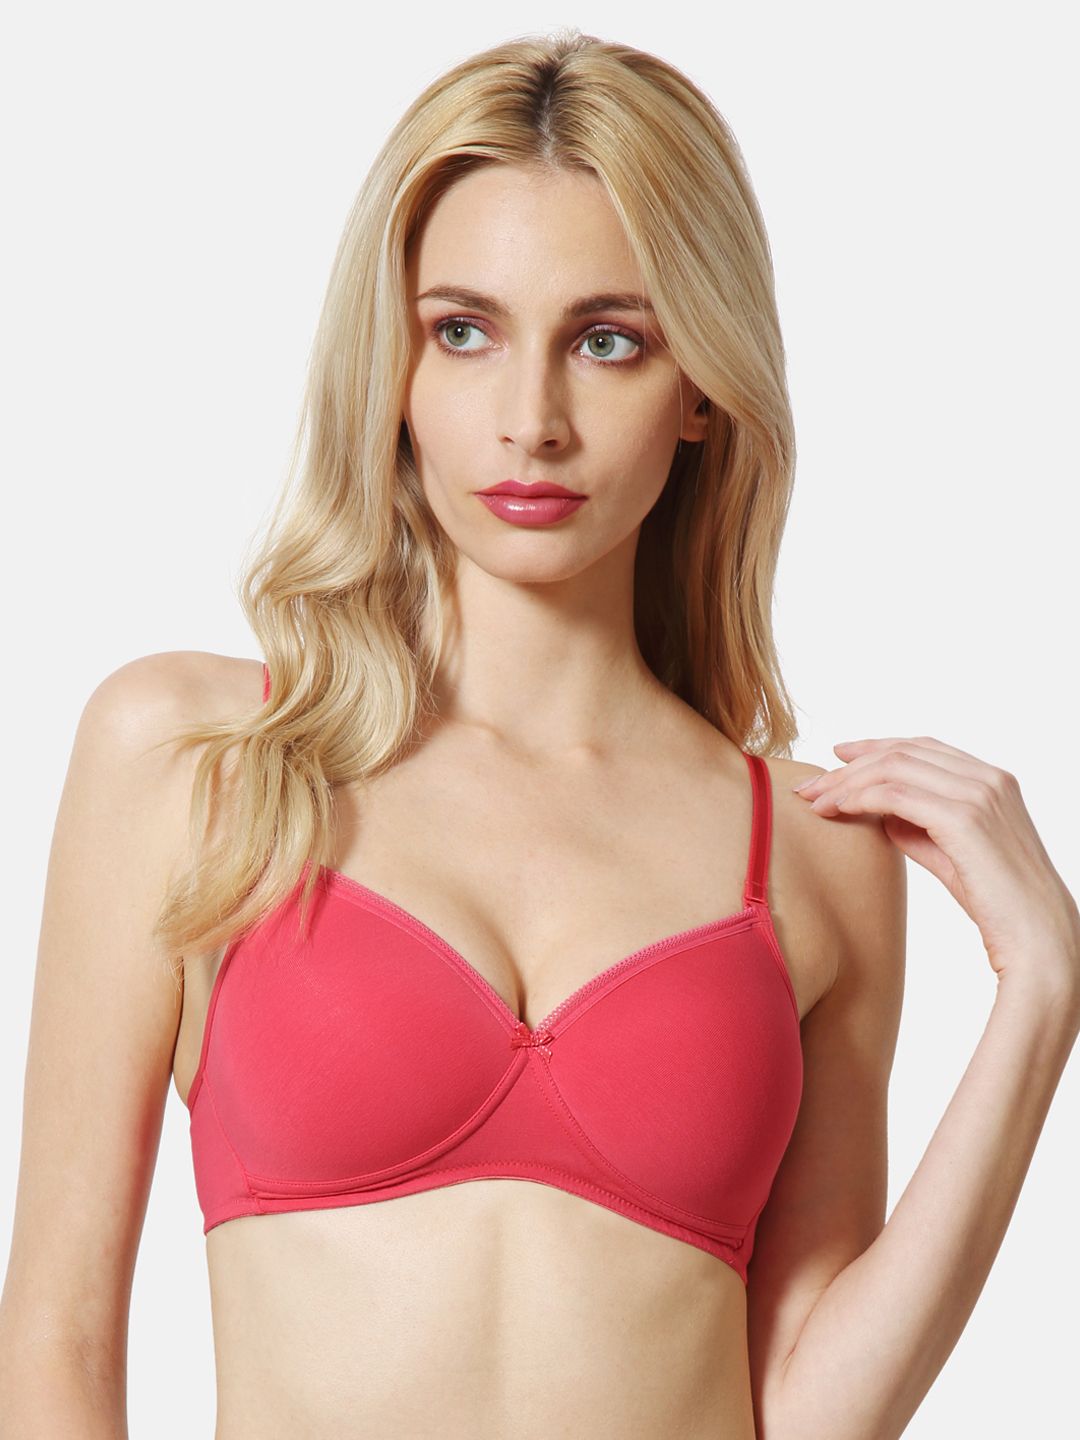 Van Heusen Coral Pink Solid Non-Wired Lightly Padded Everyday Bra ILIBR1CSSWW1211002 Price in India